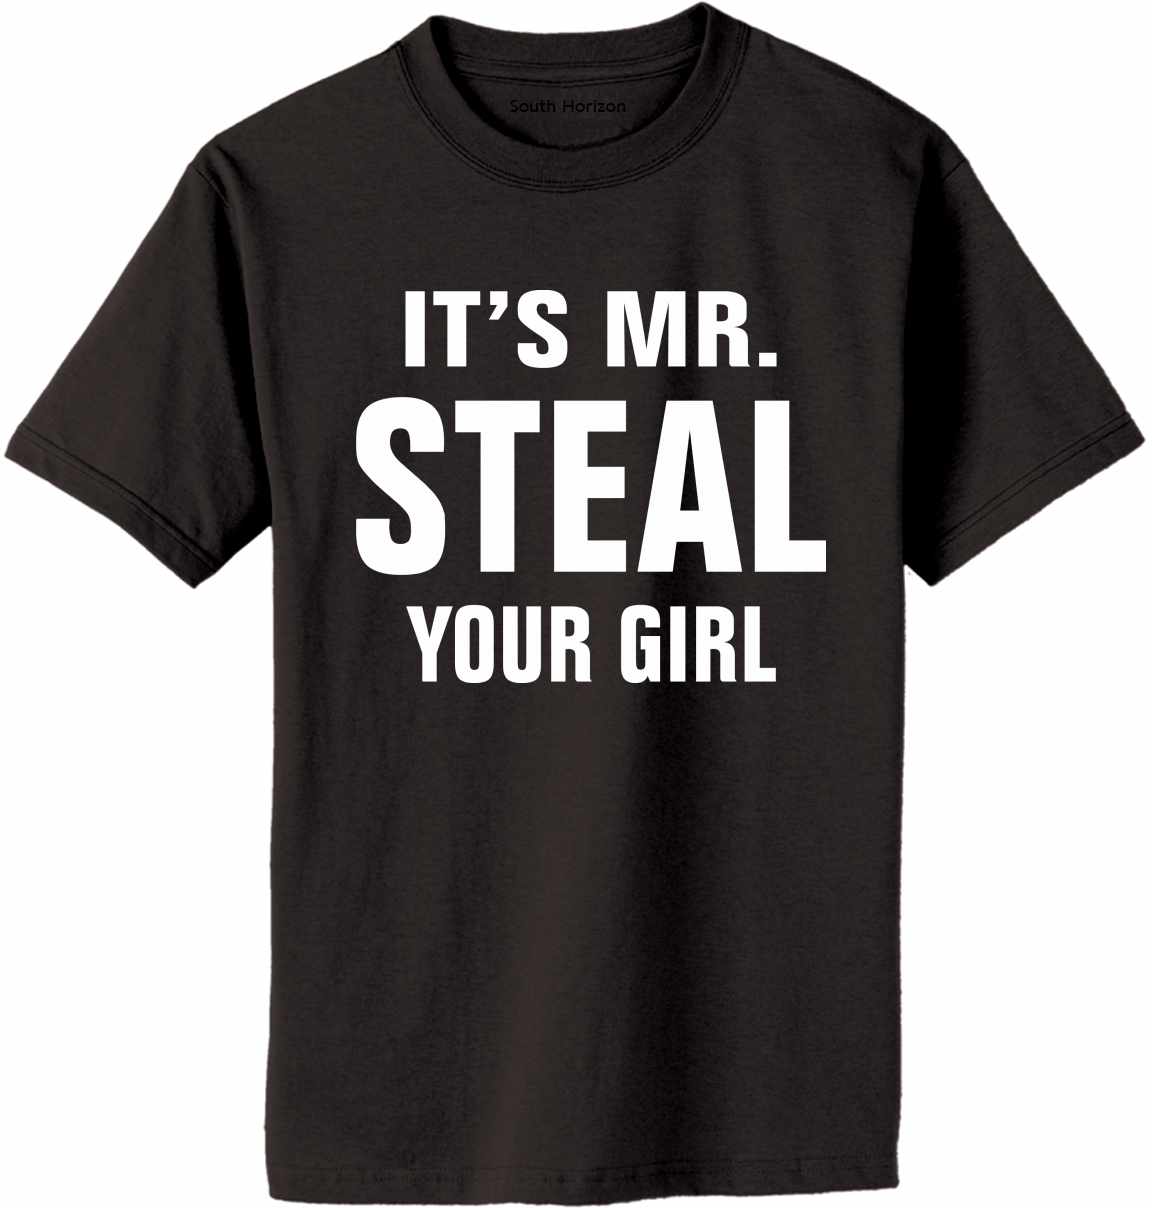 IT'S MR. STEAL YOUR GIRL Adult T-Shirt (#906-1)